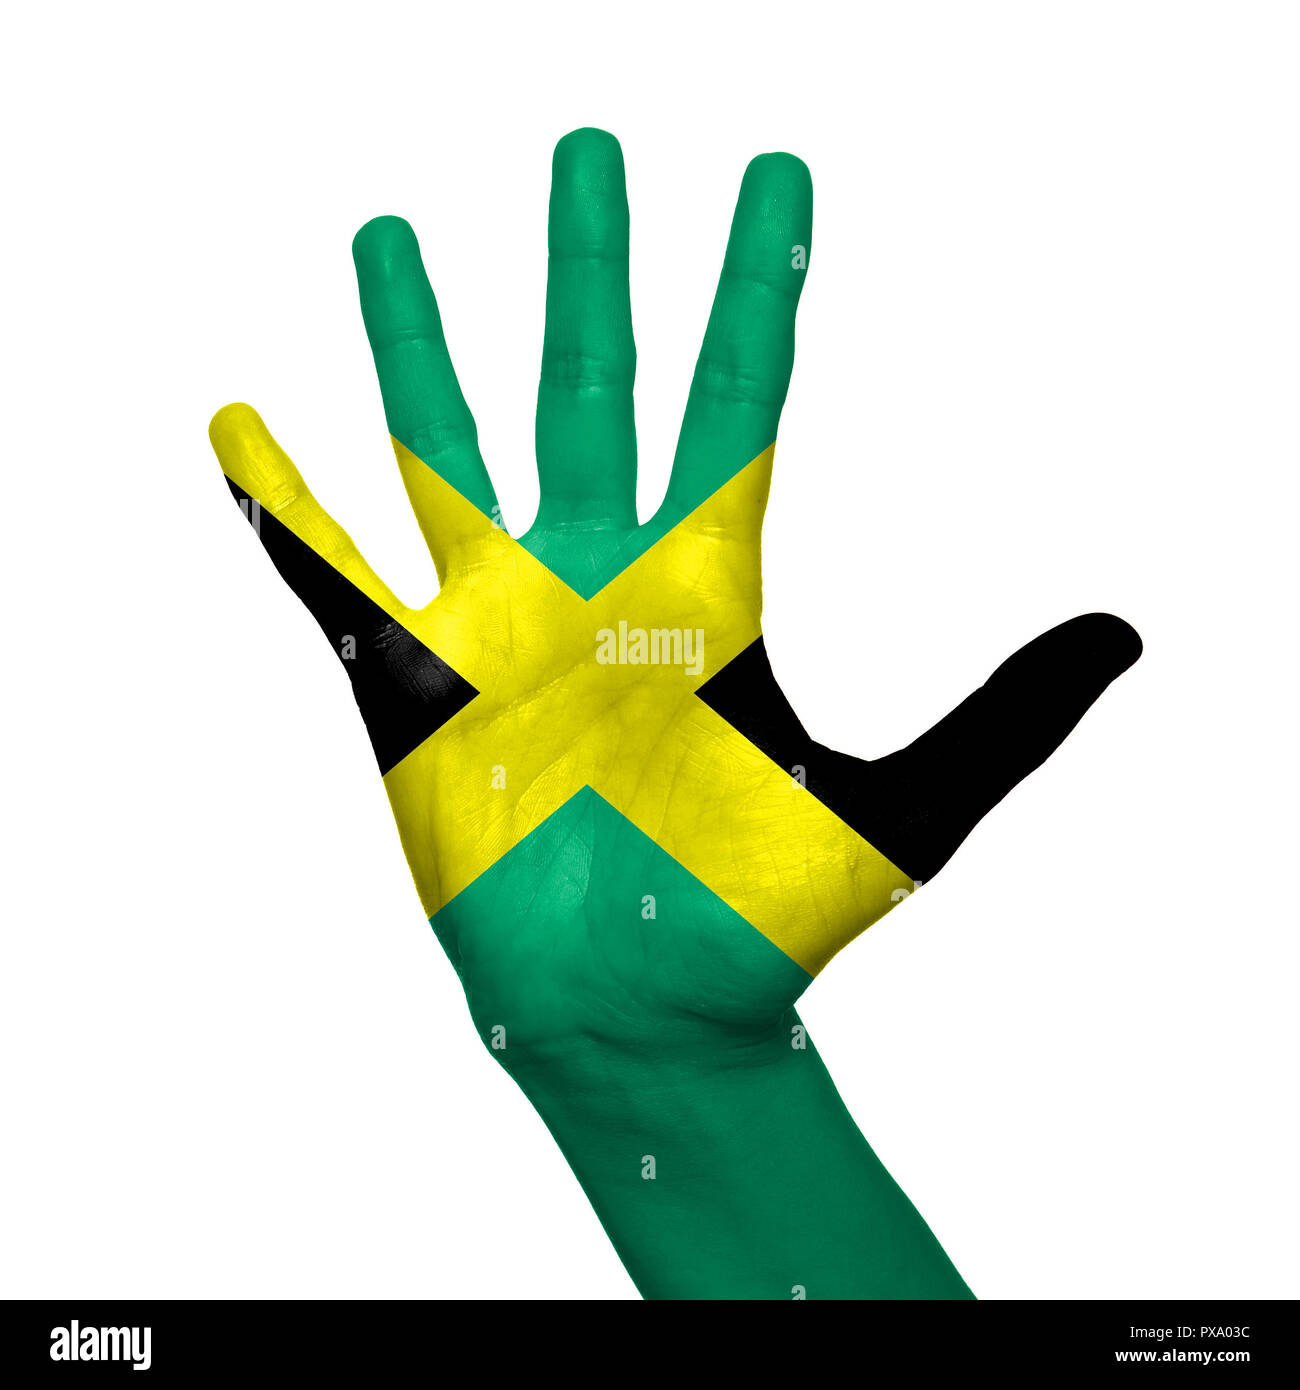 Jamaica flag painted on hand over white background Stock Photo